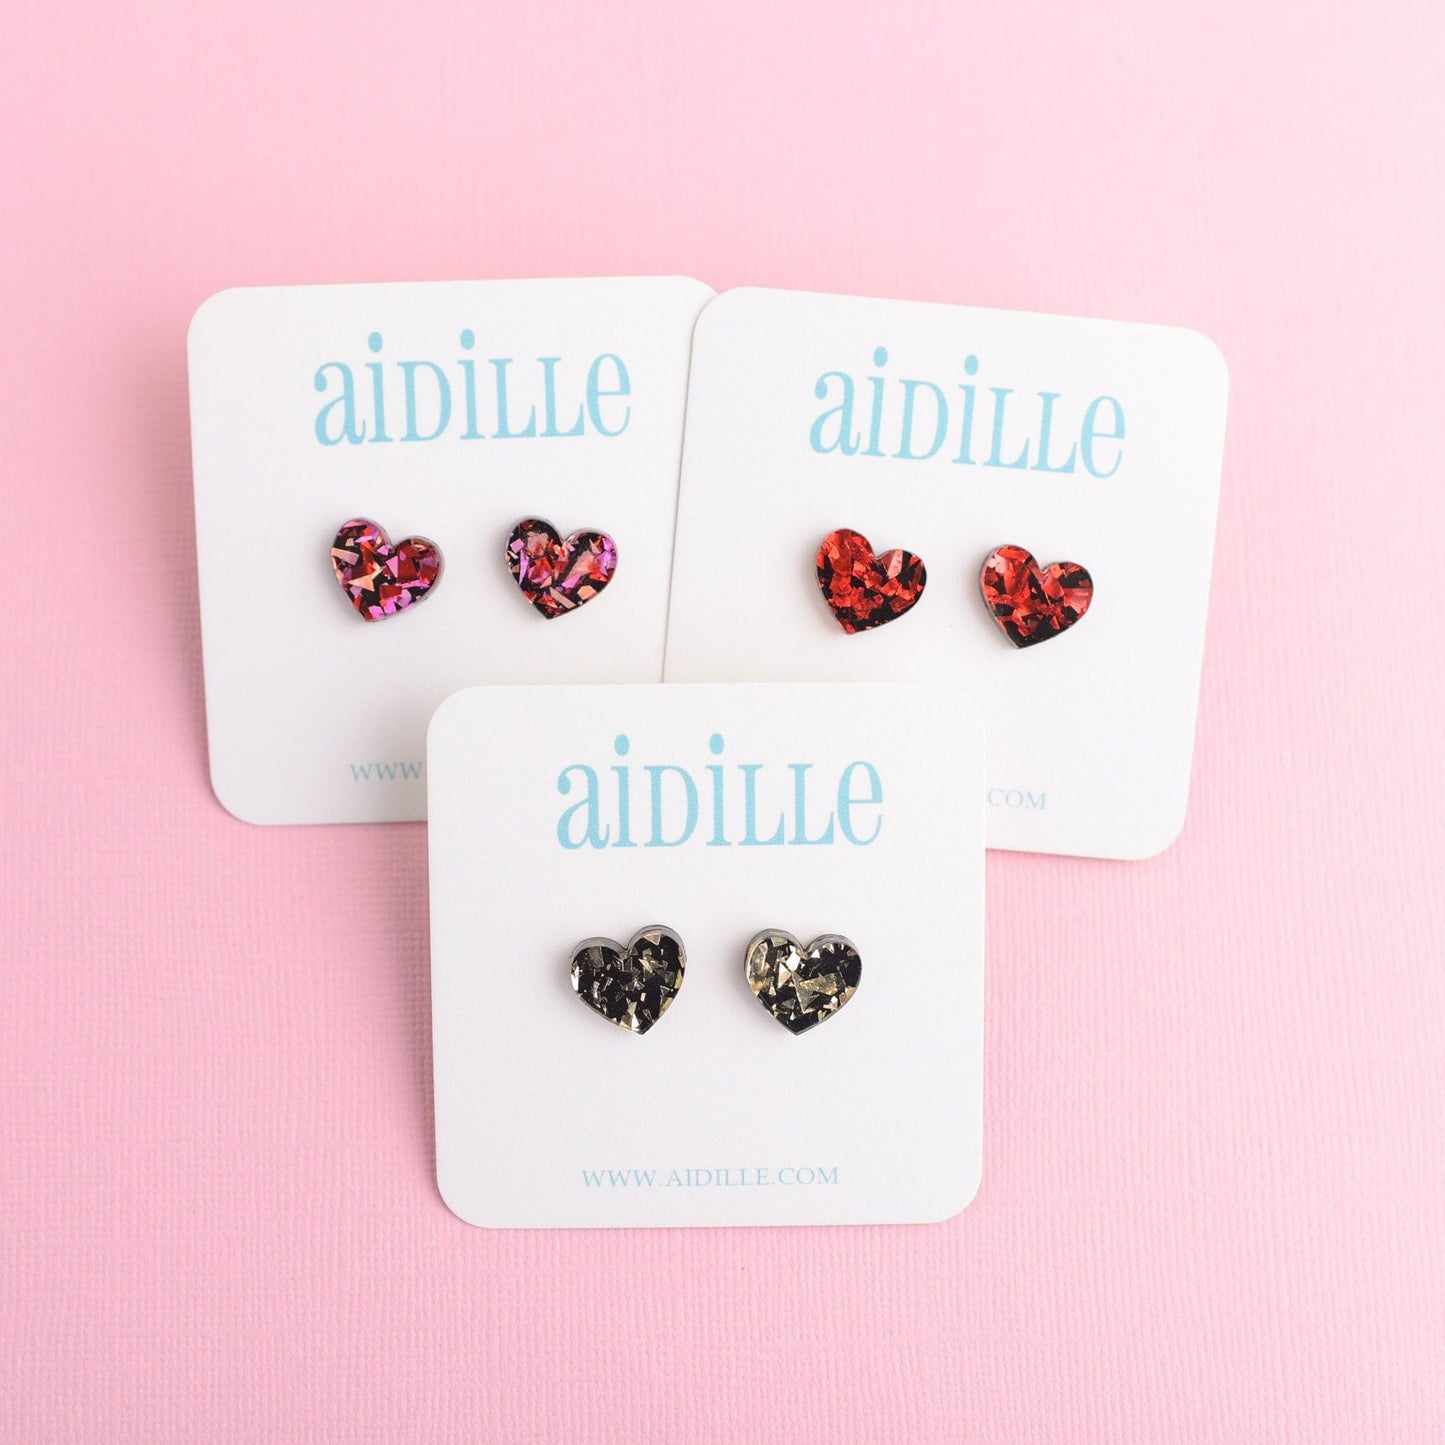 Foil Acrylic Heart Earrings with Titanium Posts- Choose Your Color